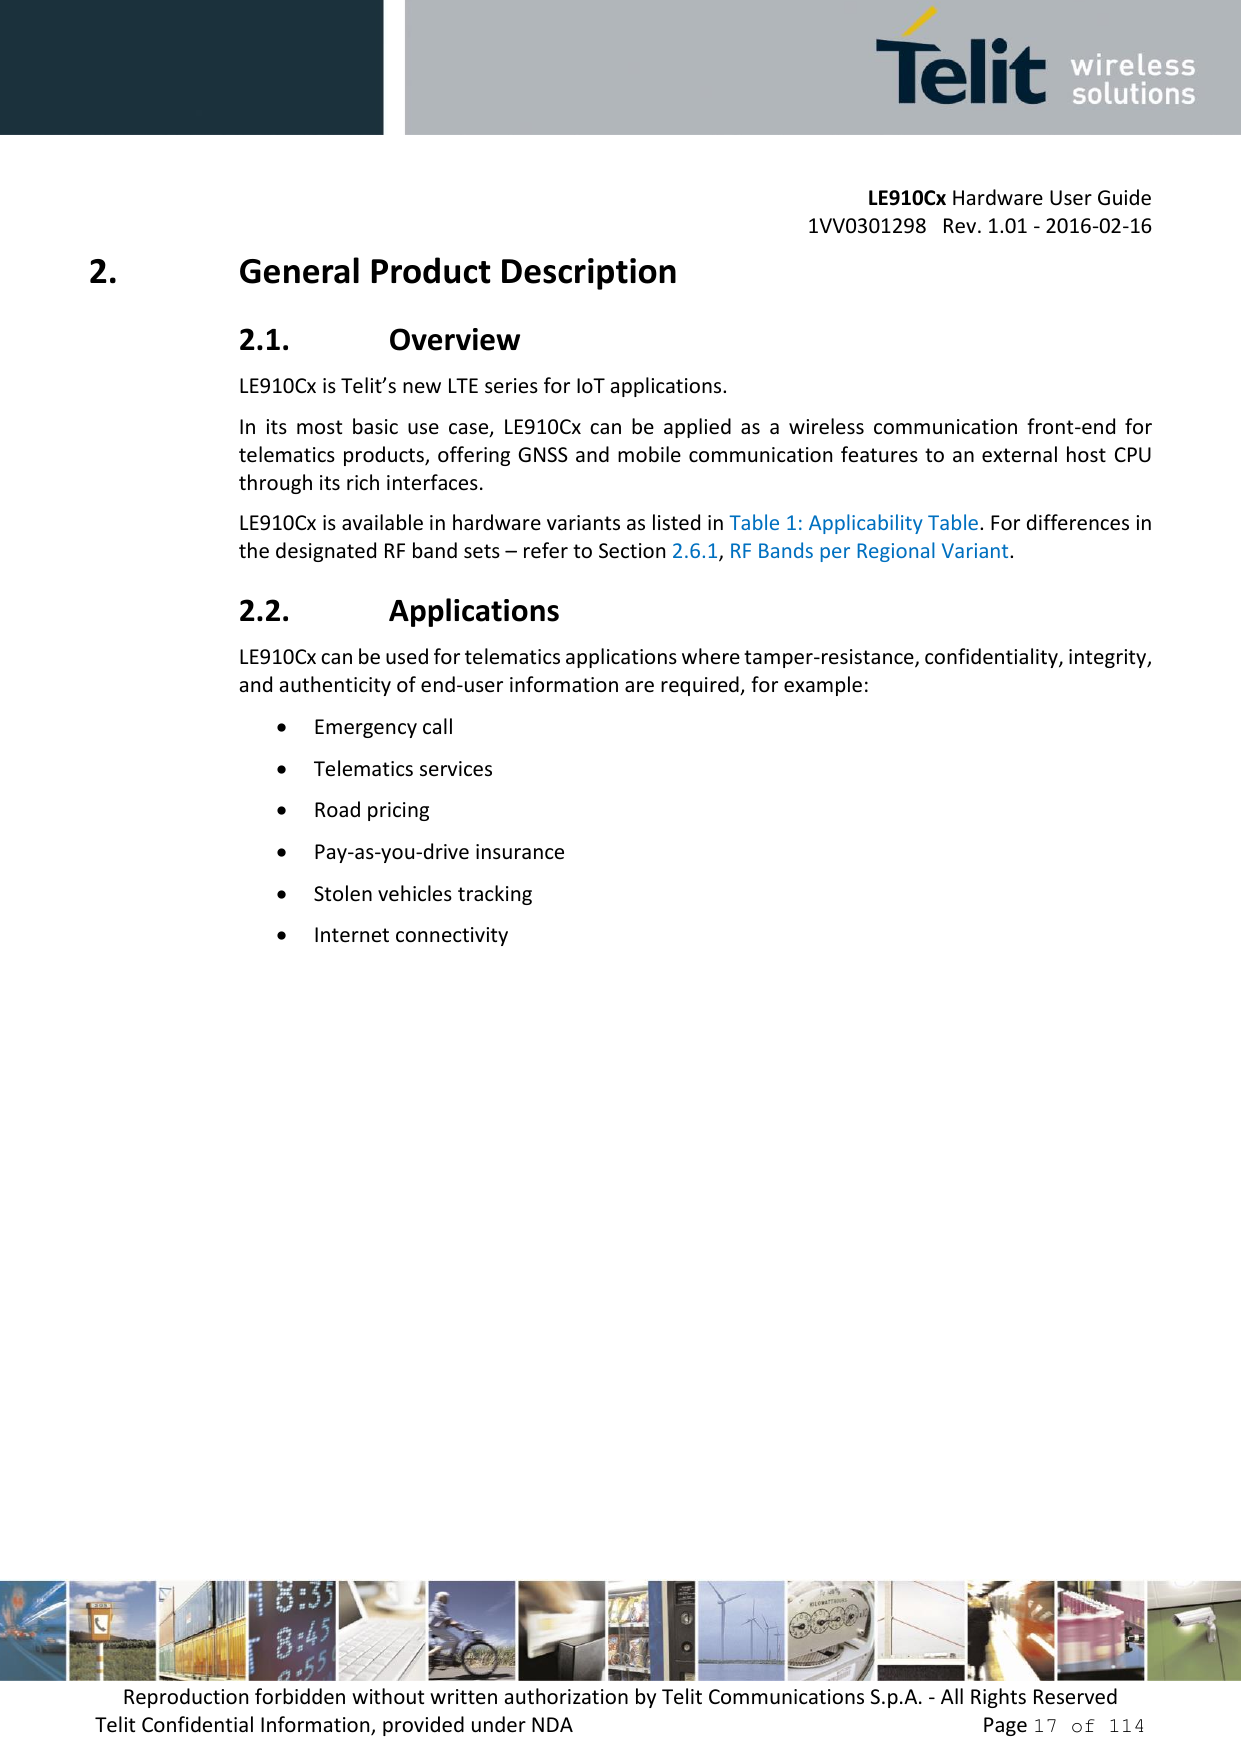         LE910Cx Hardware User Guide     1VV0301298   Rev. 1.01 - 2016-02-16 Reproduction forbidden without written authorization by Telit Communications S.p.A. - All Rights Reserved Telit Confidential Information, provided under NDA                 Page 17 of 114 2. General Product Description 2.1. Overview LE910Cx is Telit’s new LTE series for IoT applications.  In  its  most  basic  use  case,  LE910Cx  can  be  applied  as  a  wireless  communication  front-end  for telematics products, offering GNSS and mobile communication features to an external host  CPU through its rich interfaces. LE910Cx is available in hardware variants as listed in Table 1: Applicability Table. For differences in the designated RF band sets – refer to Section 2.6.1, RF Bands per Regional Variant. 2.2. Applications LE910Cx can be used for telematics applications where tamper-resistance, confidentiality, integrity, and authenticity of end-user information are required, for example:  Emergency call  Telematics services  Road pricing  Pay-as-you-drive insurance  Stolen vehicles tracking  Internet connectivity    